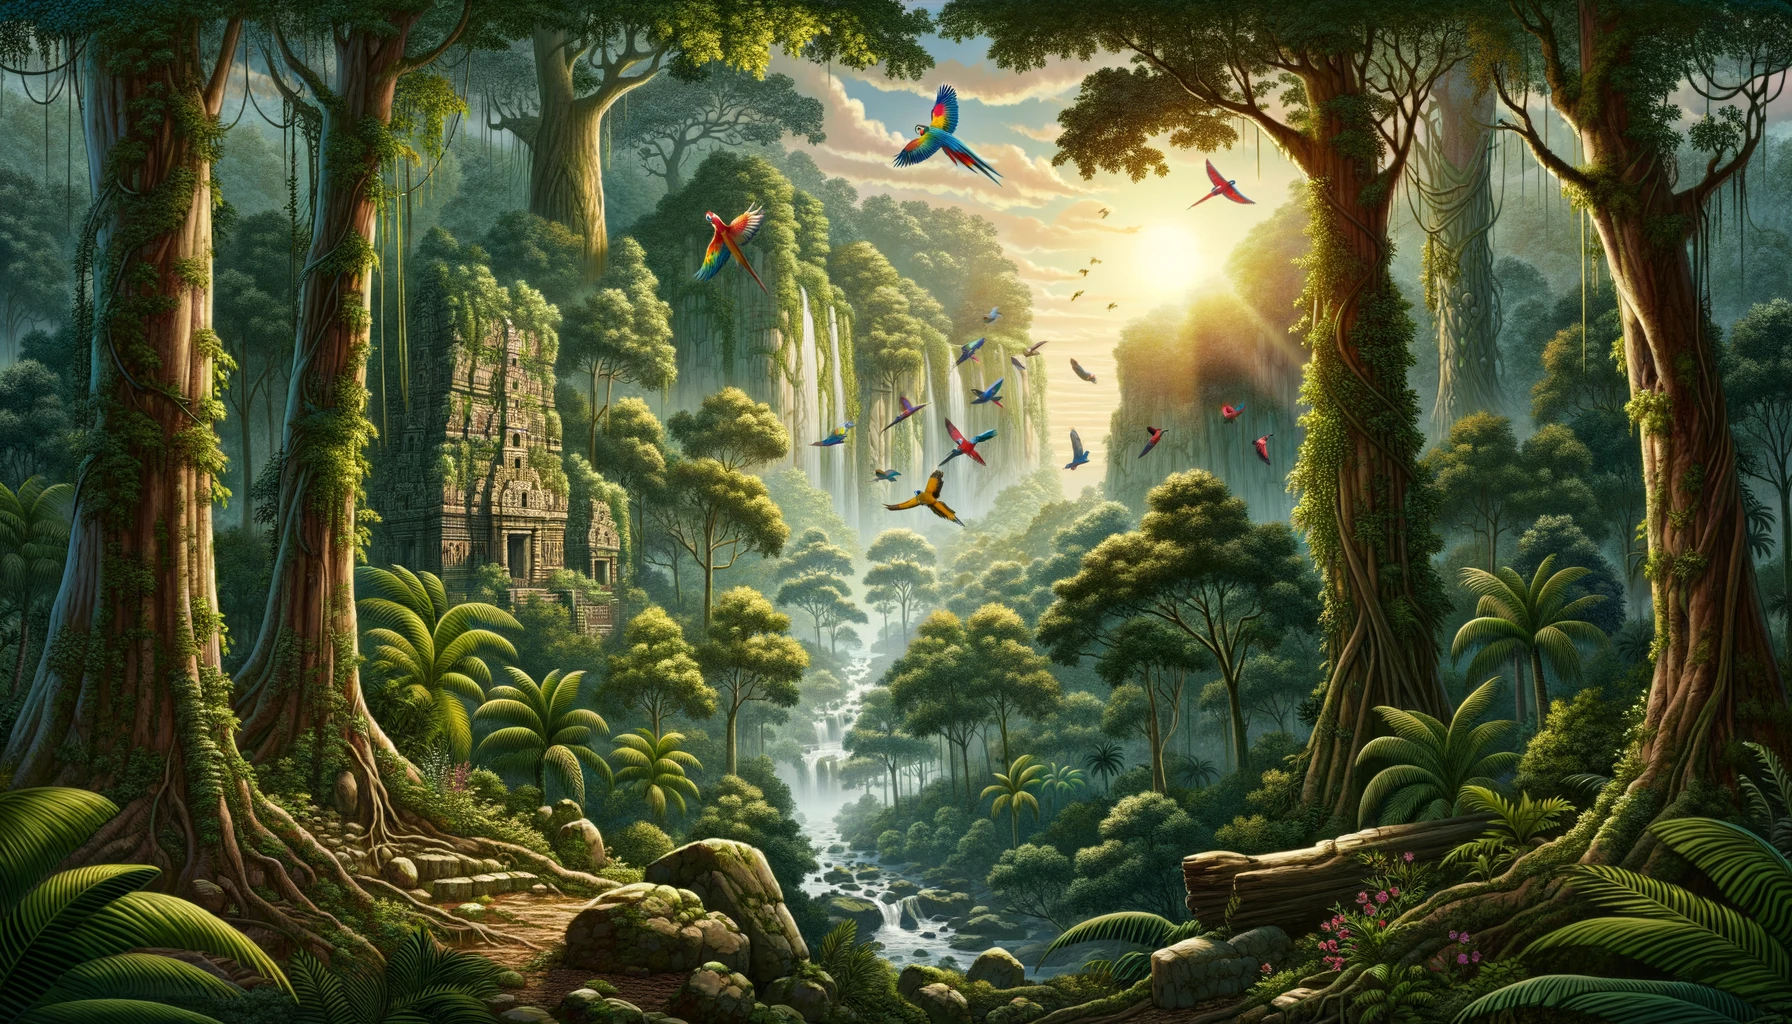 Illustration of a dense rainforest with towering trees and thick undergrowth. As the sun rises, its rays pierce through the canopy, revealing flocks of colorful parrots soaring in the sky. The sounds of water can be heard, and in the distance, multiple waterfalls flow down rocky cliffs. Hidden amongst the vegetation, an old temple with intricate carvings stands, suggesting tales of an ancient civilization.